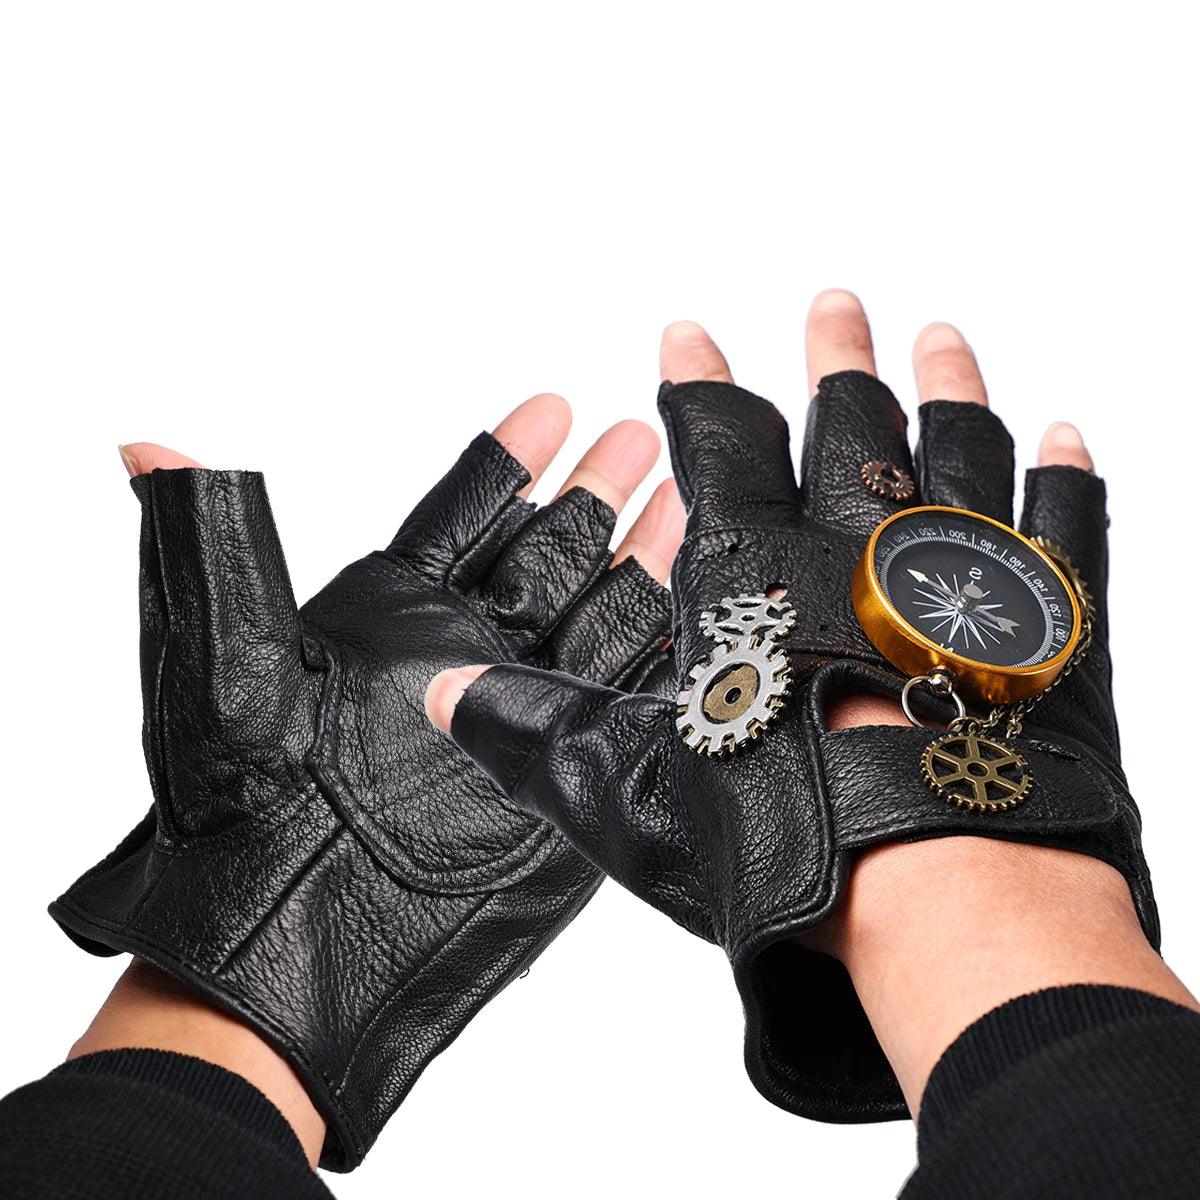 Steampunk Faux Leather Compass Gloves Gloves - The Burner Shop